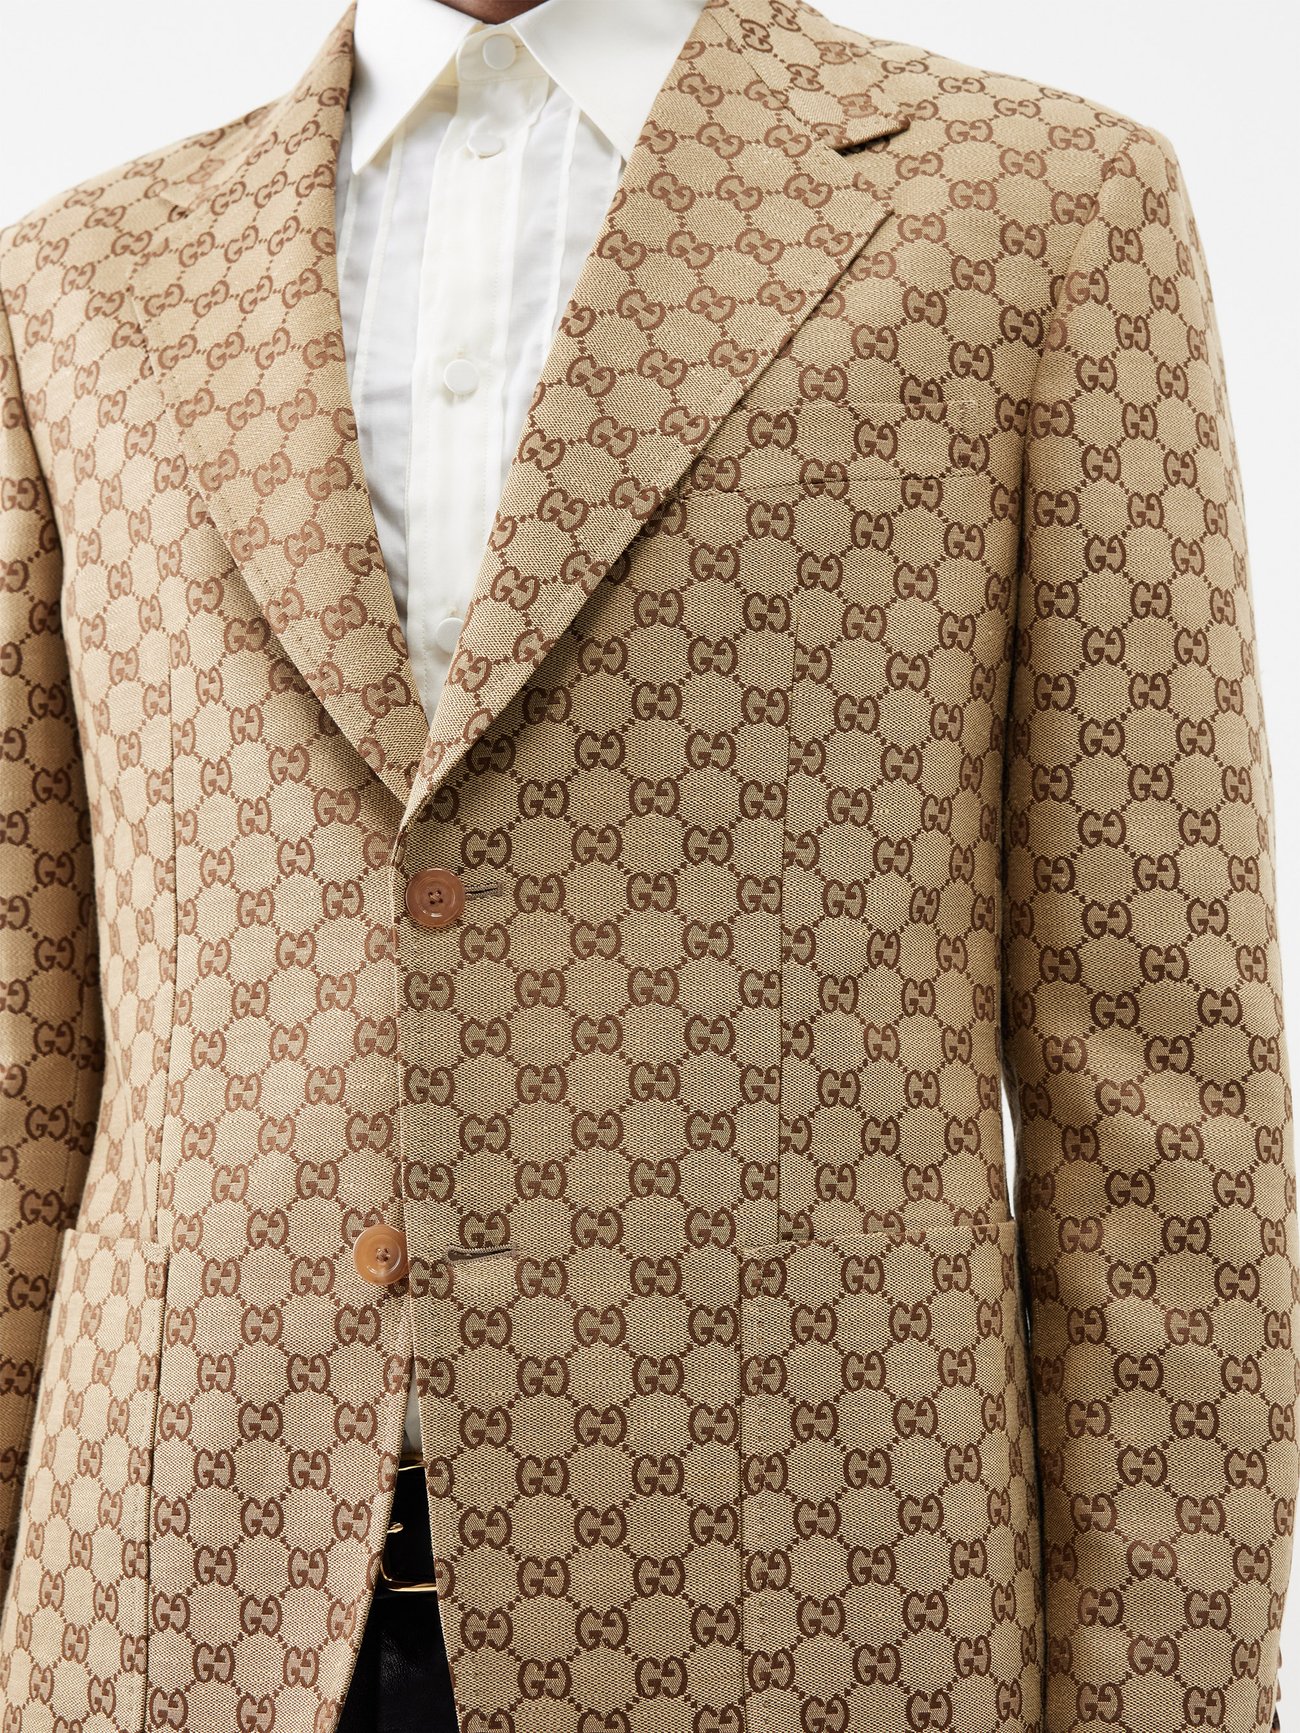 GG Supreme linen formal jacket in camel and ebony